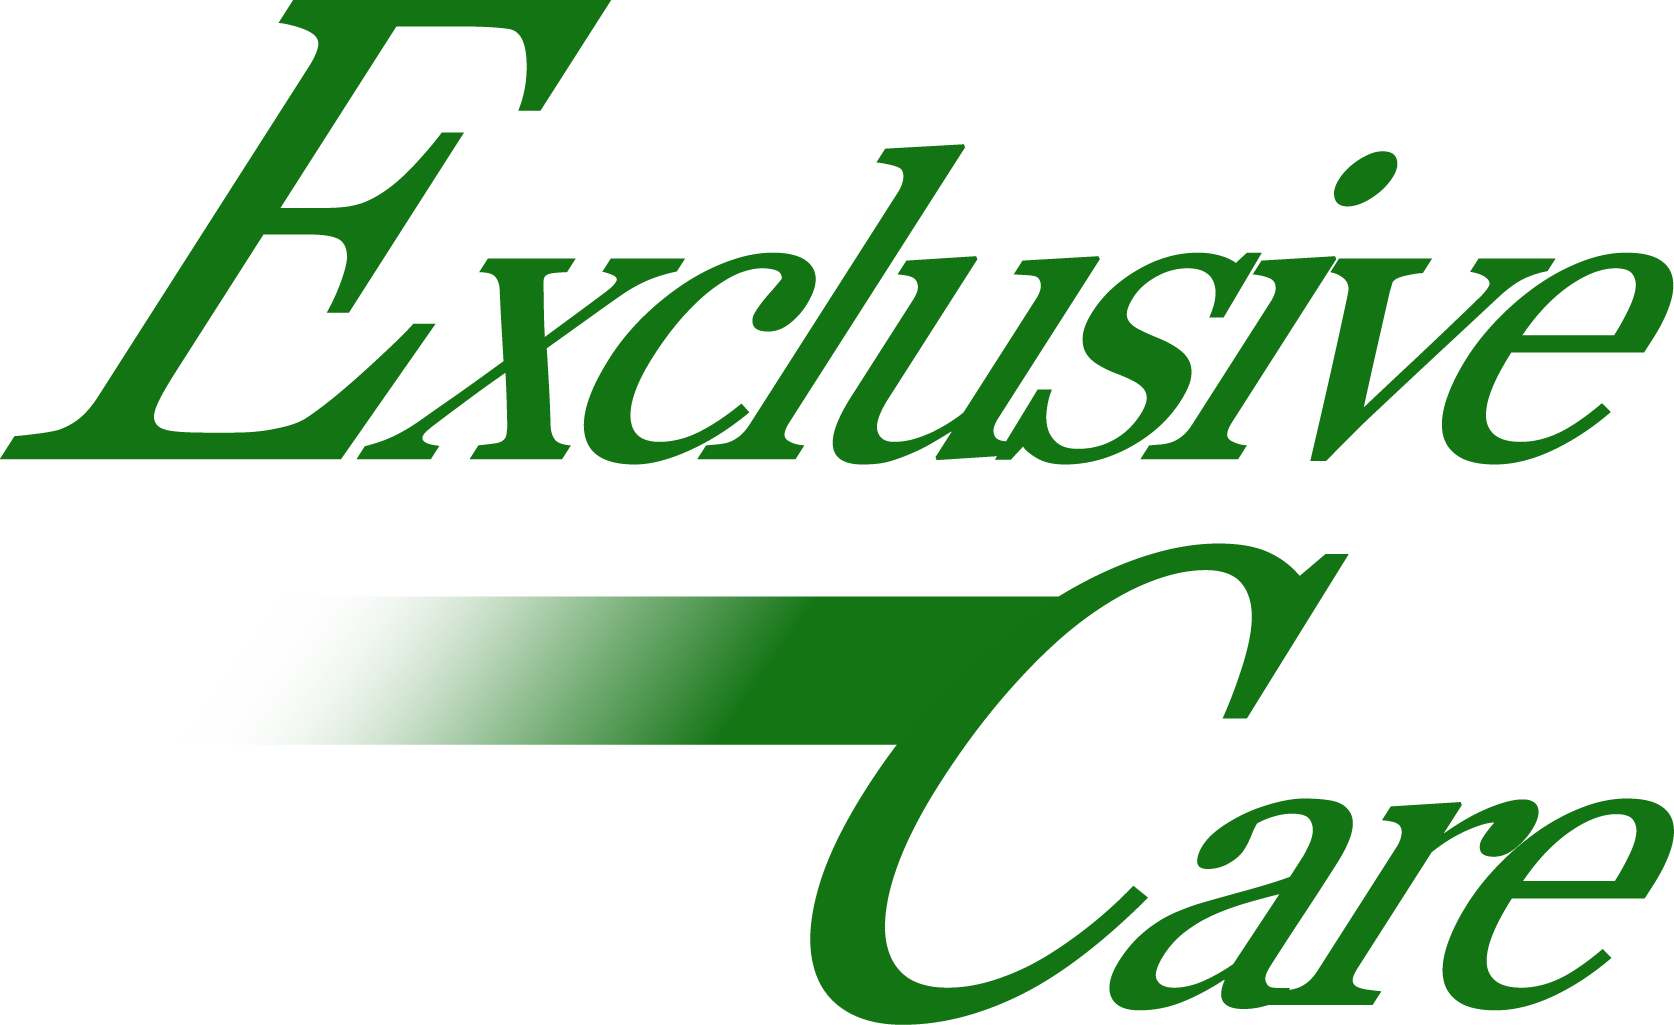 EXCLUSIVE CARE